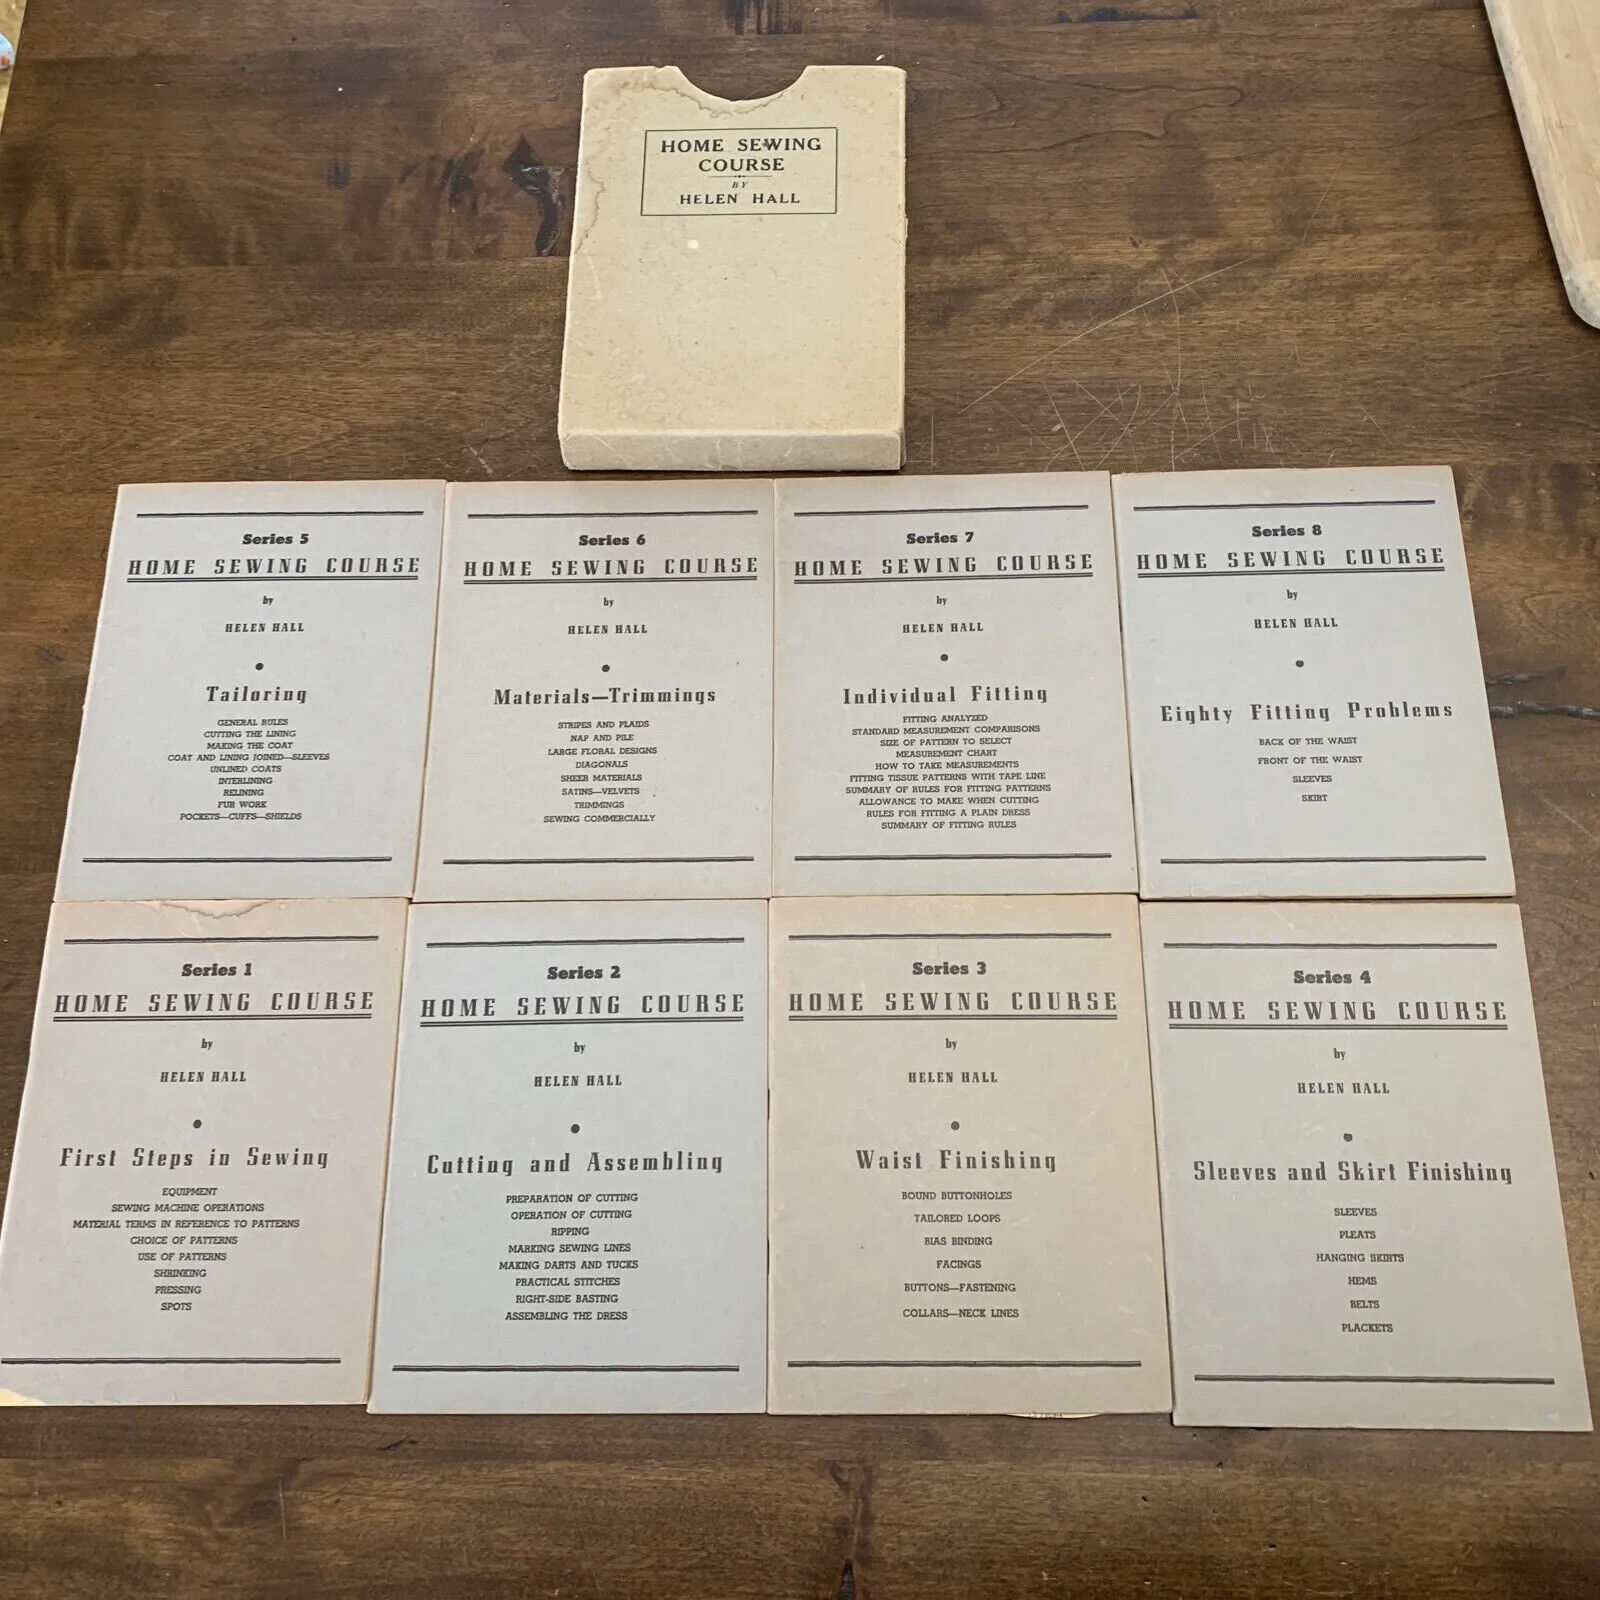 Home Sewing Course by Helen Hall Series 1-8 Booklets Copyright 1936-1937